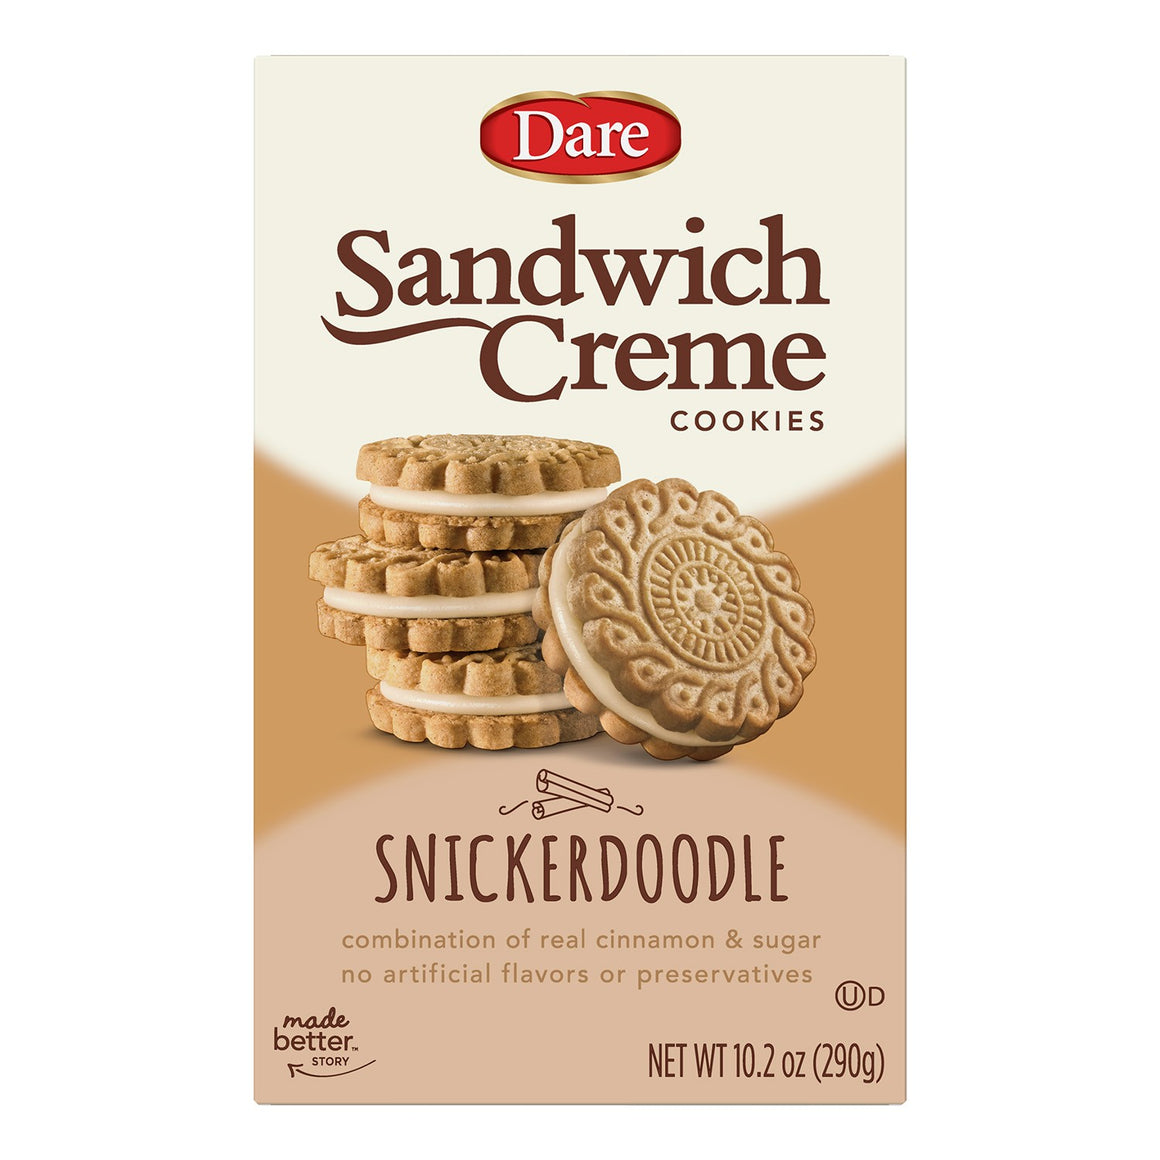 Dare Snickerdoodle Creme Cookies 10.2 oz. Box - For fresh candy and great service, visit www.allcitycandy.com